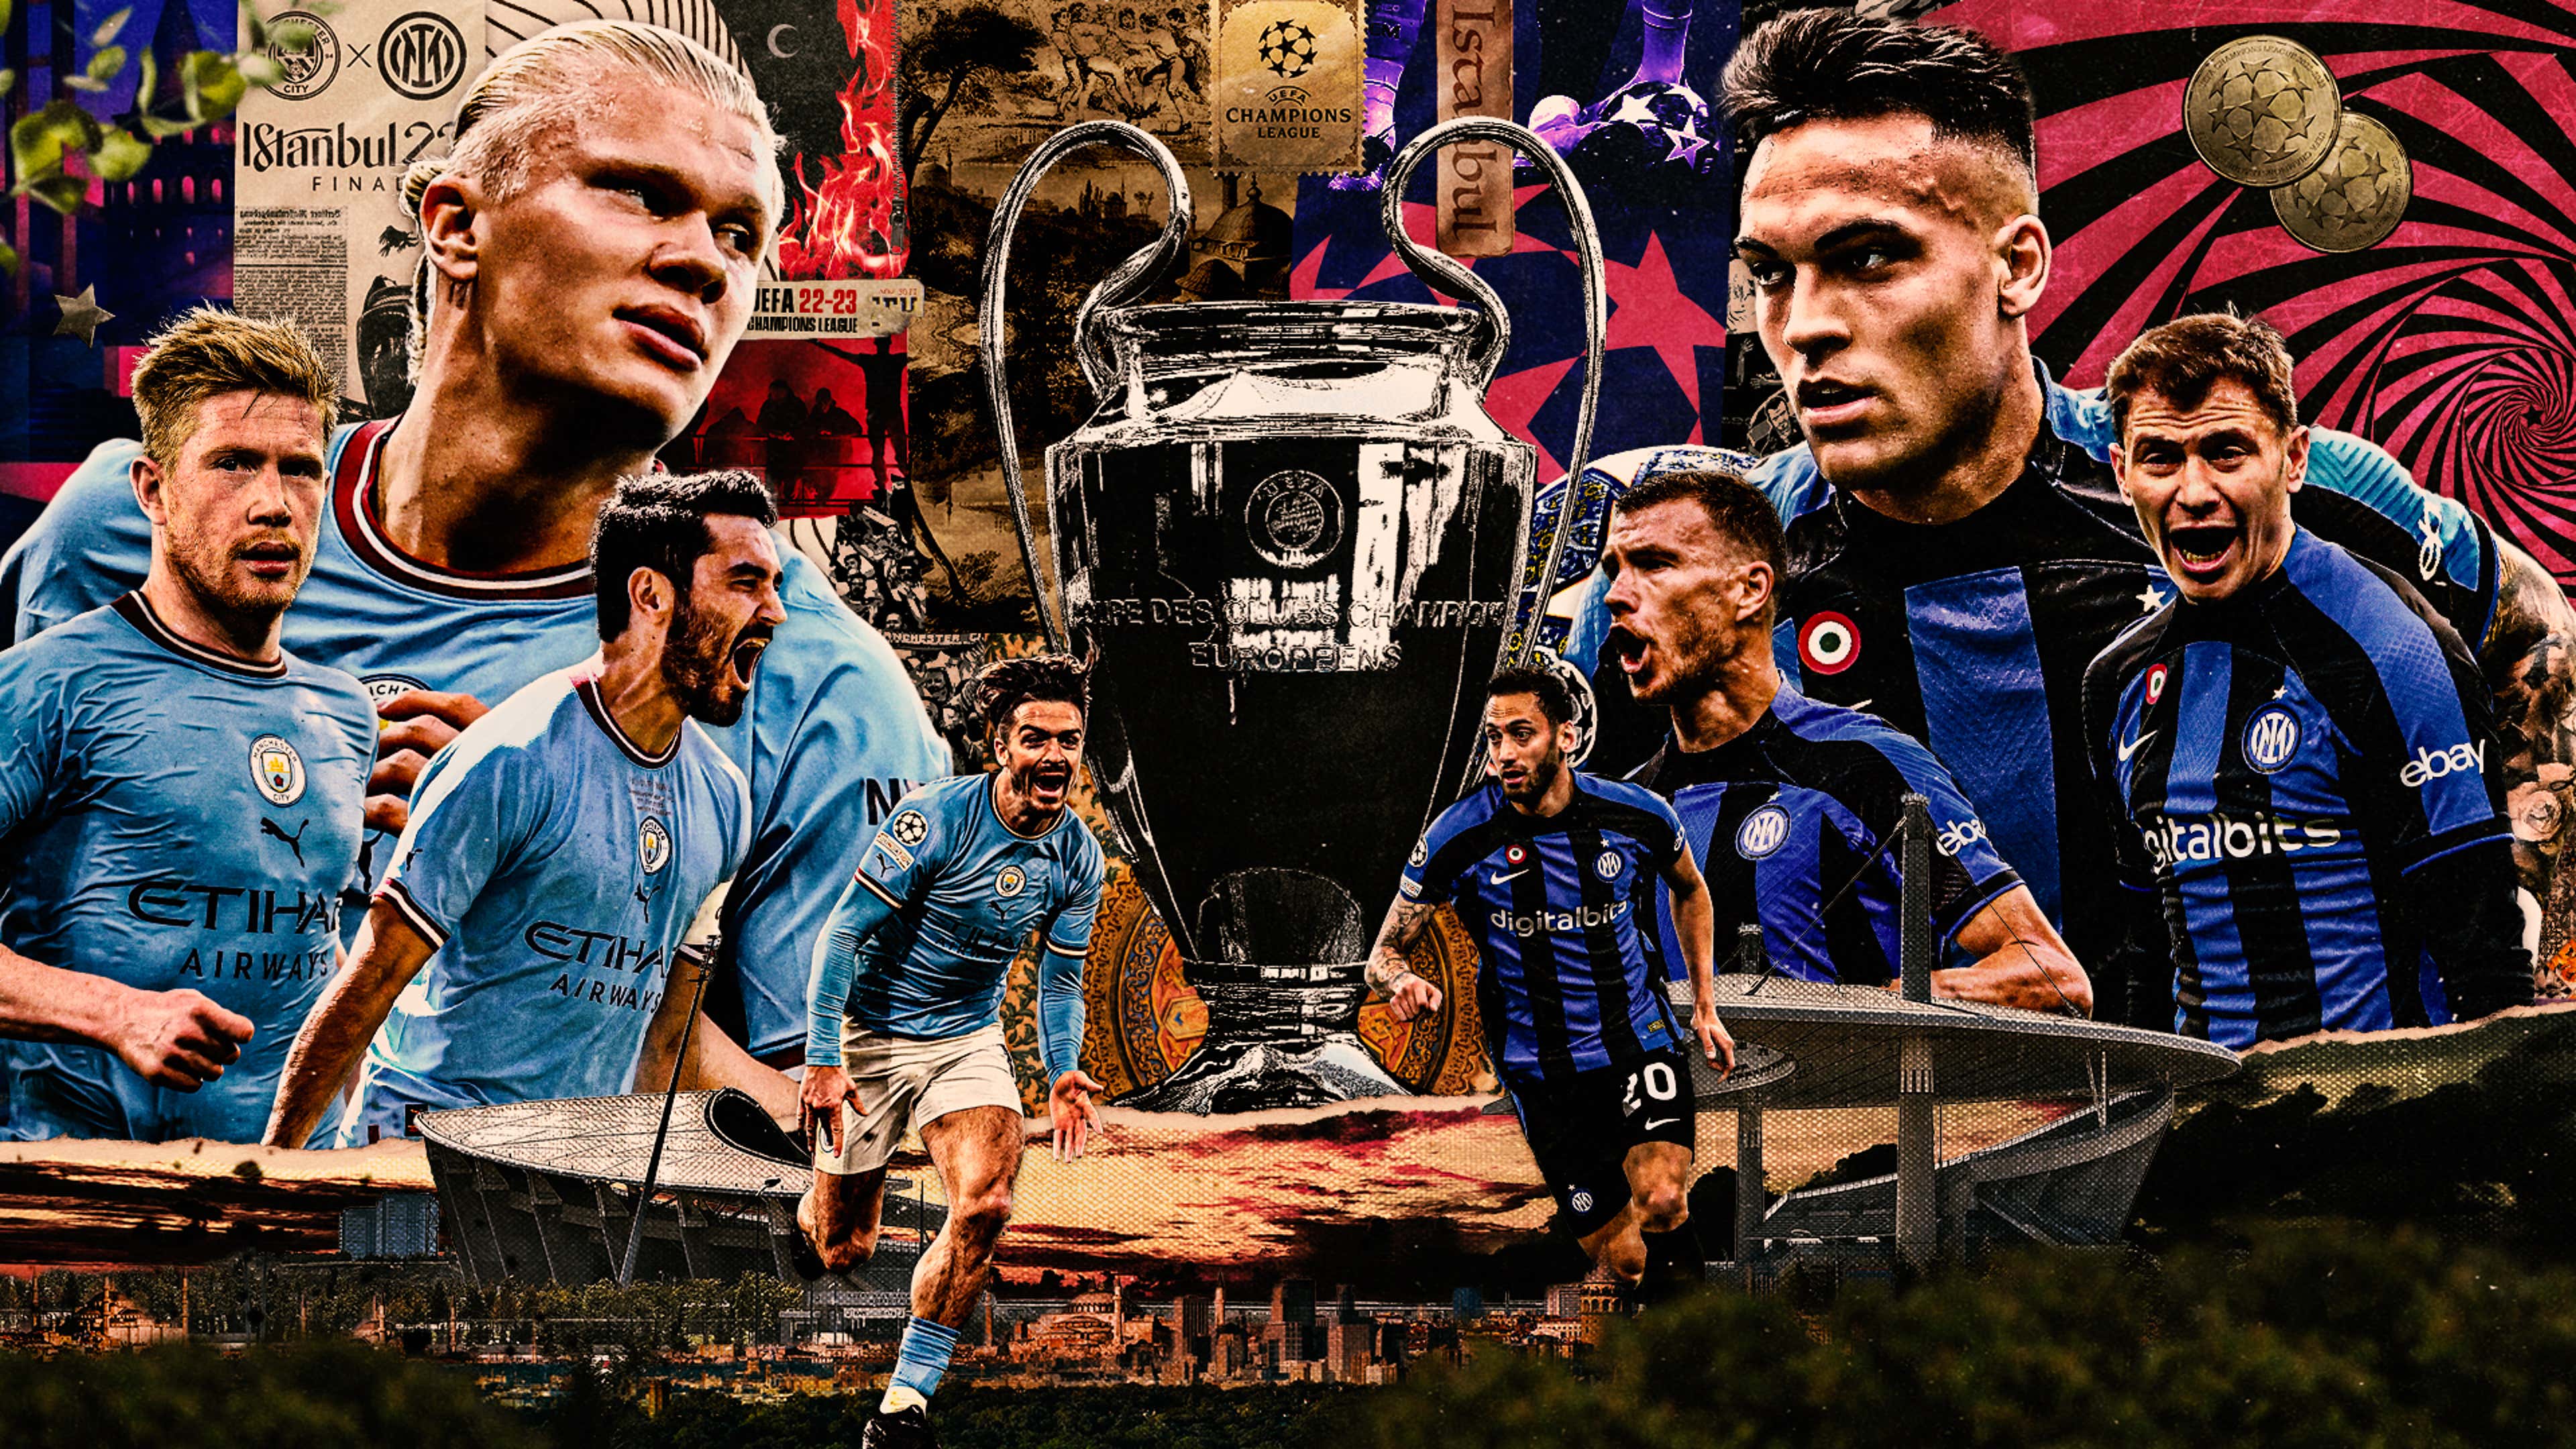 City to face Inter in Champions League final